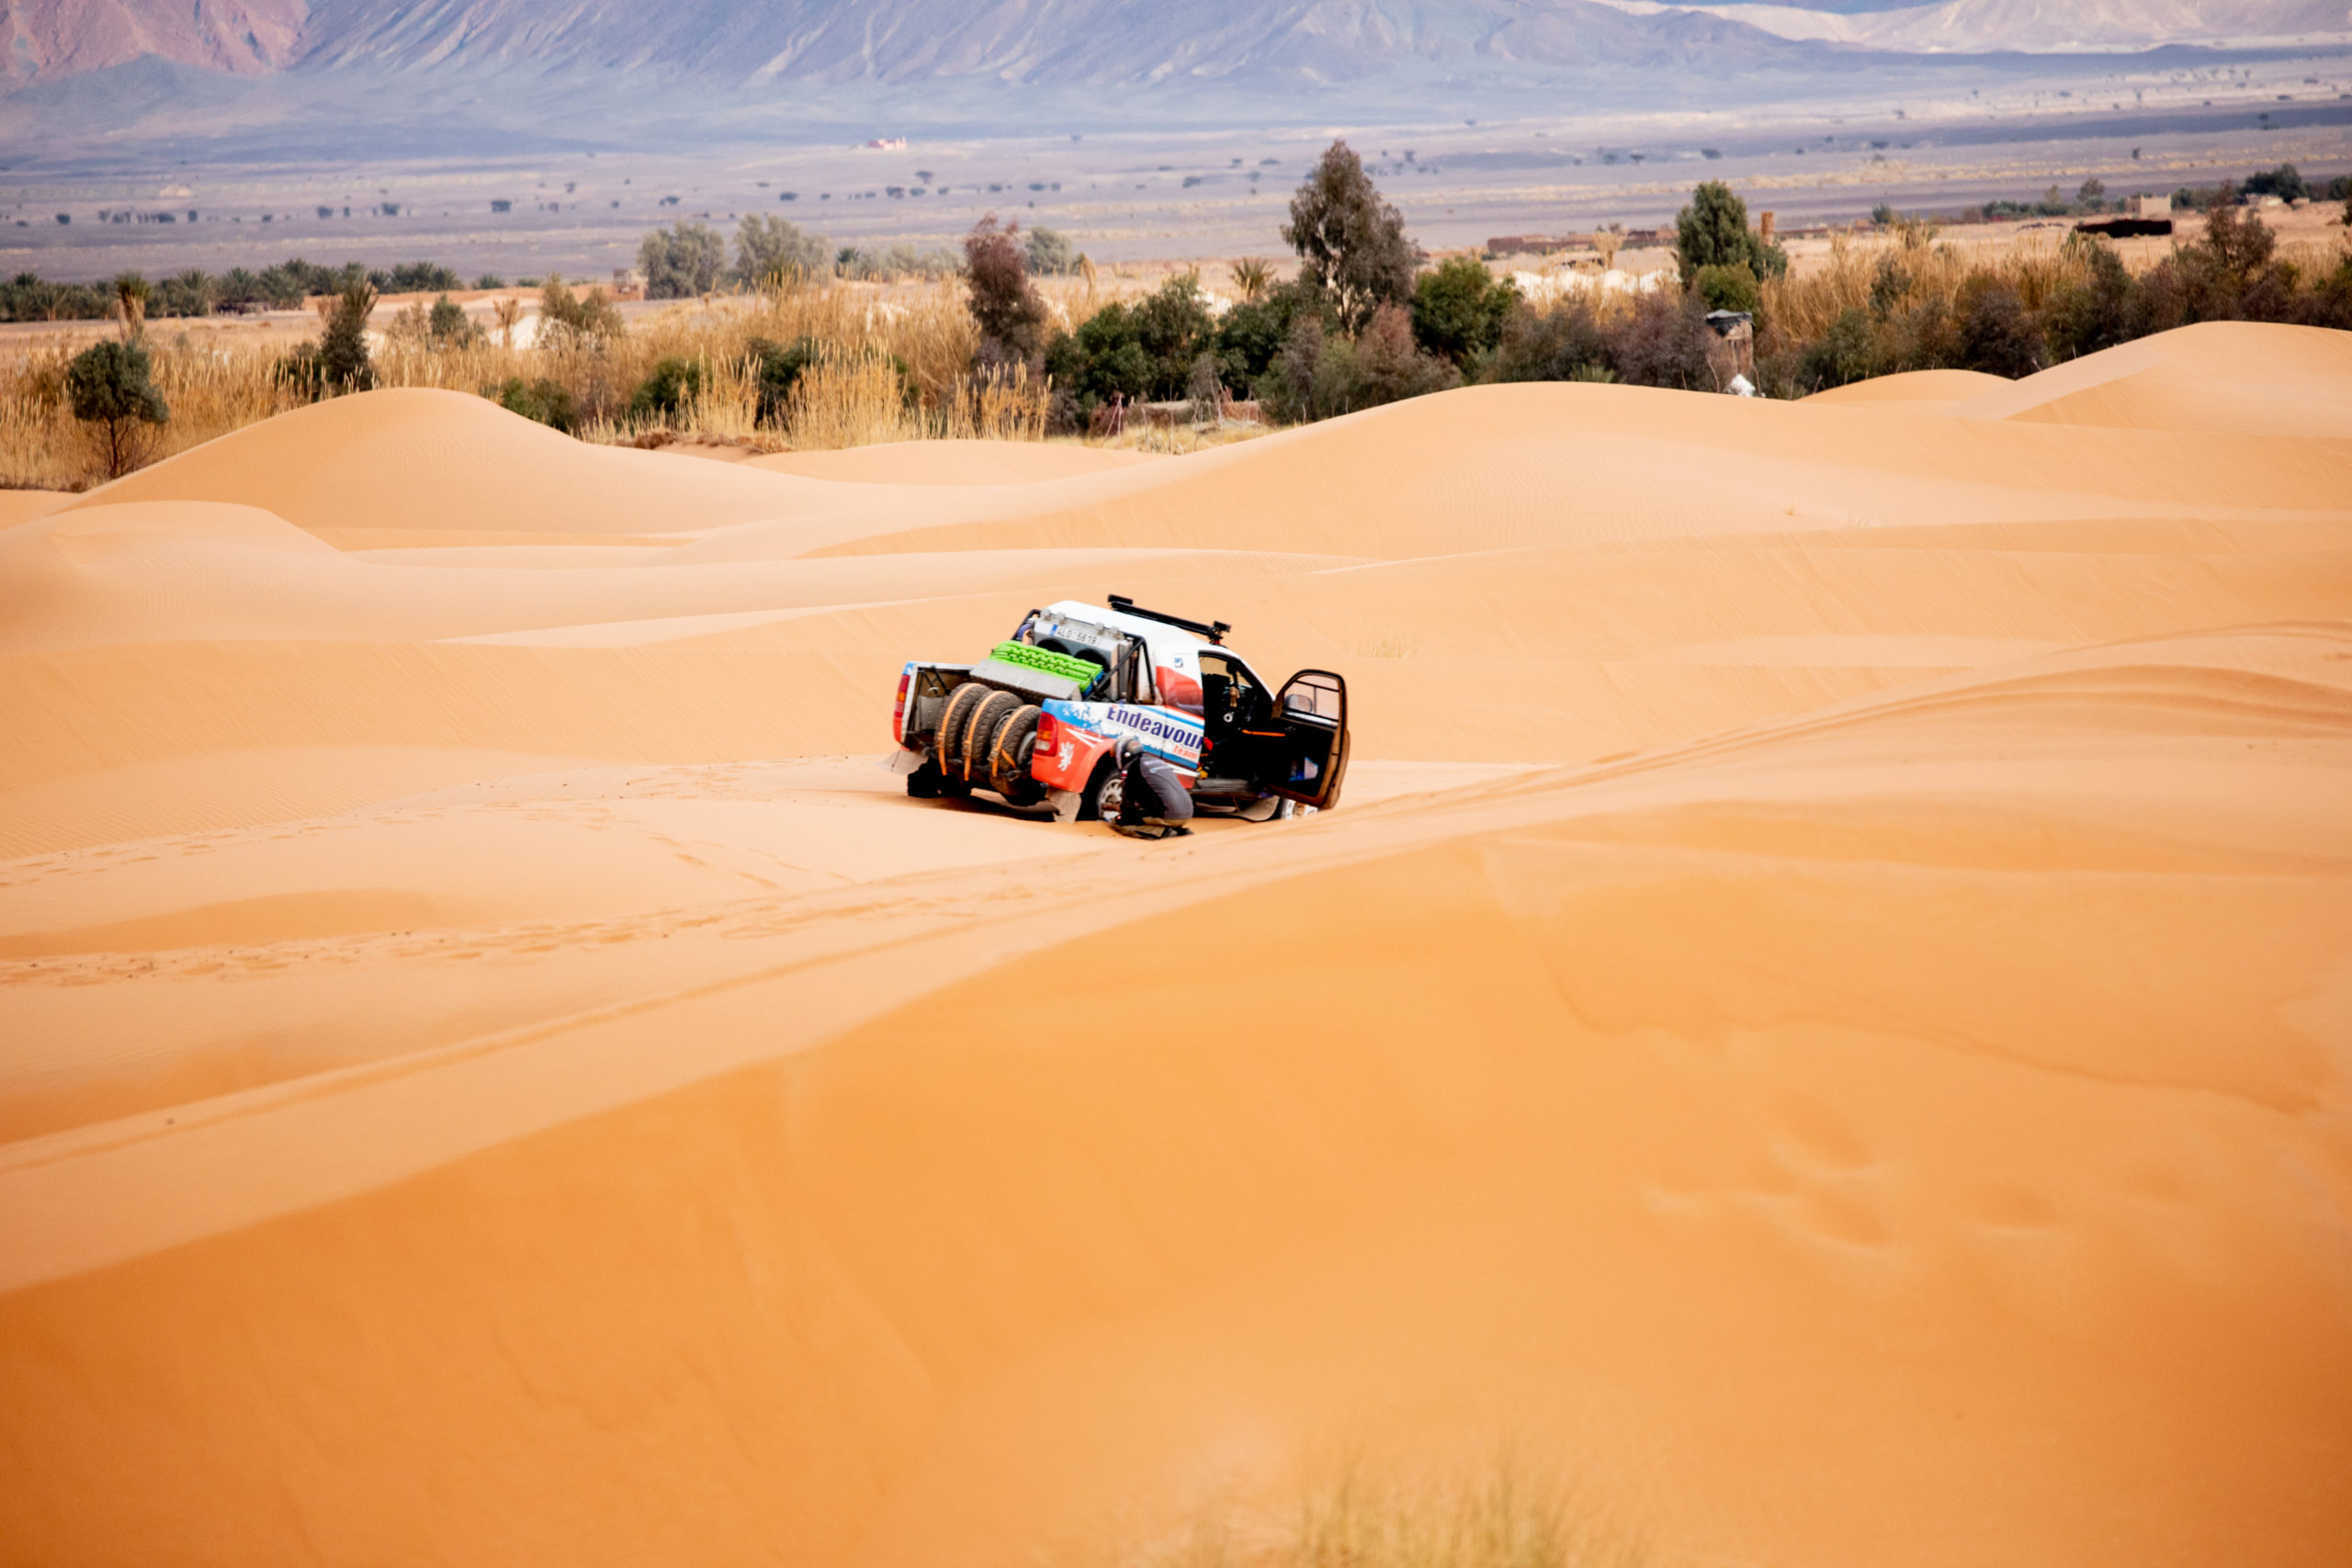 Car participanting in The Real Way to Dakar by Intercontinental Rally